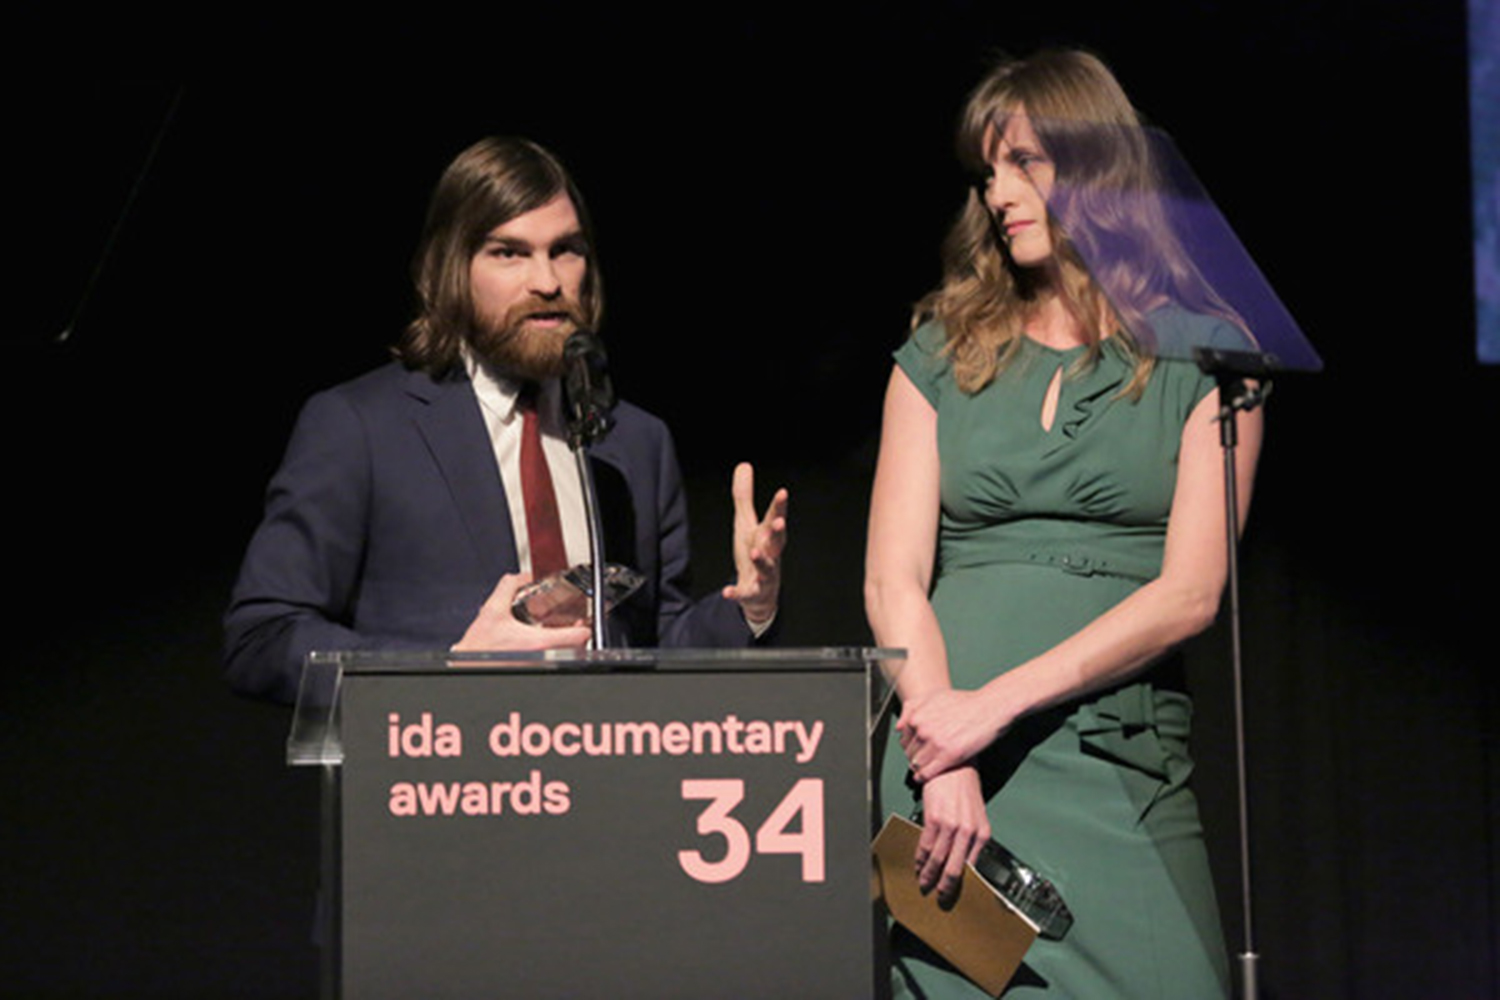 Andy Mills and Larissa Anderson, winners of the first Best Audio Documentary Award for 'Caliphate' speak onstage during the 2018 IDA Documentary Awards. Photo by Rebecca Sapp